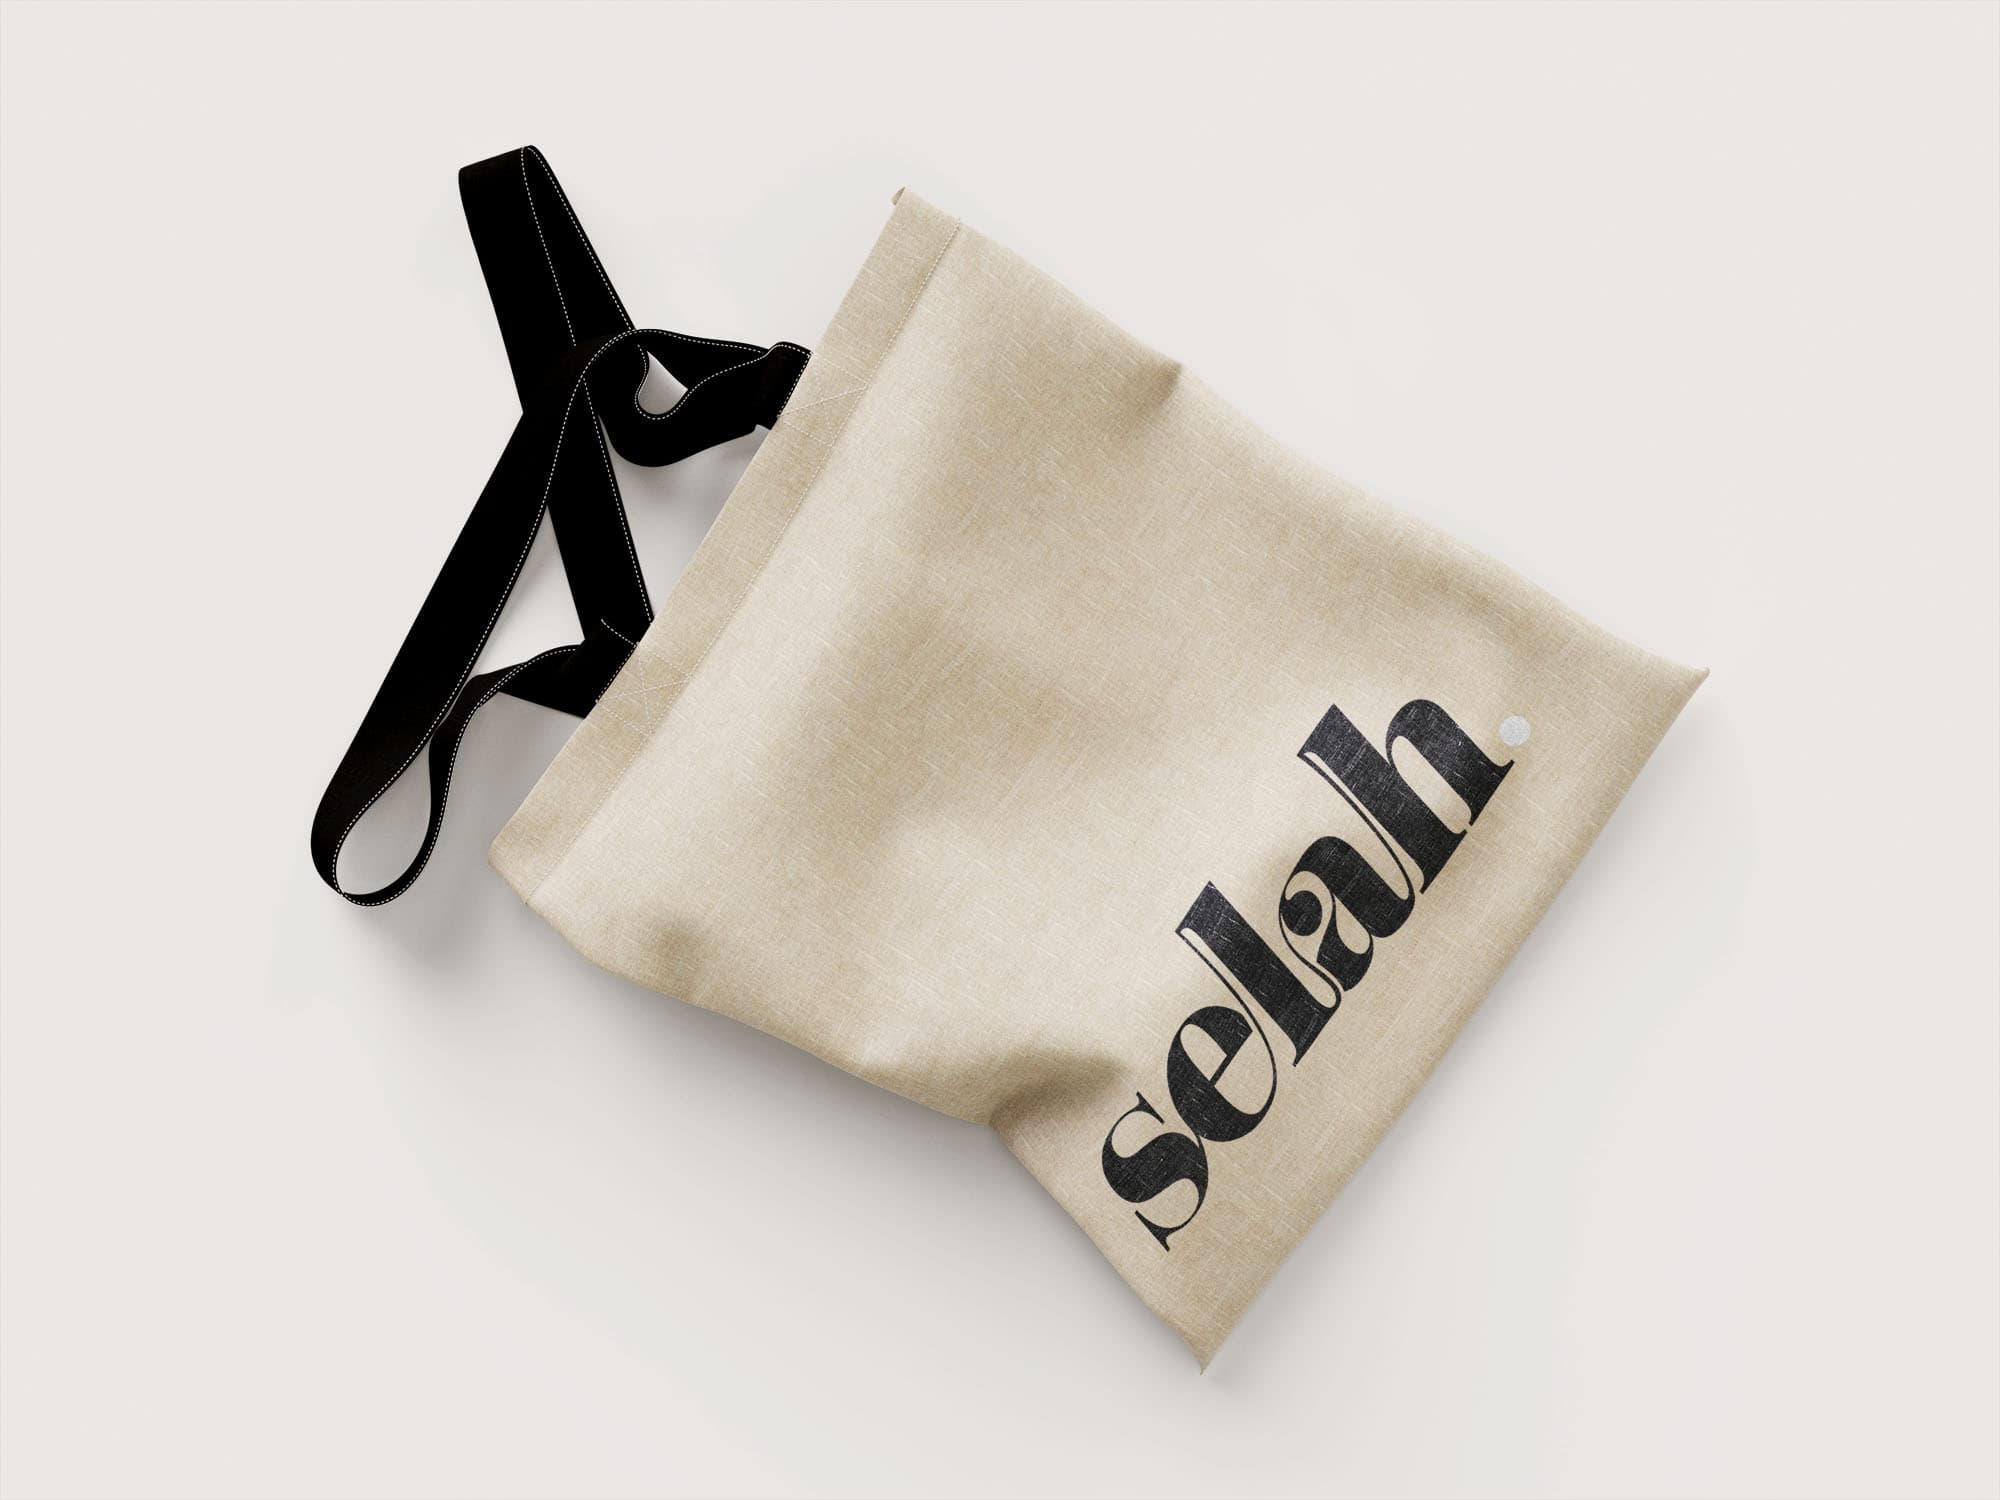 Selah logo presented on a tote bag mockup. This logotype was created by customising one of One Church's branding fonts.